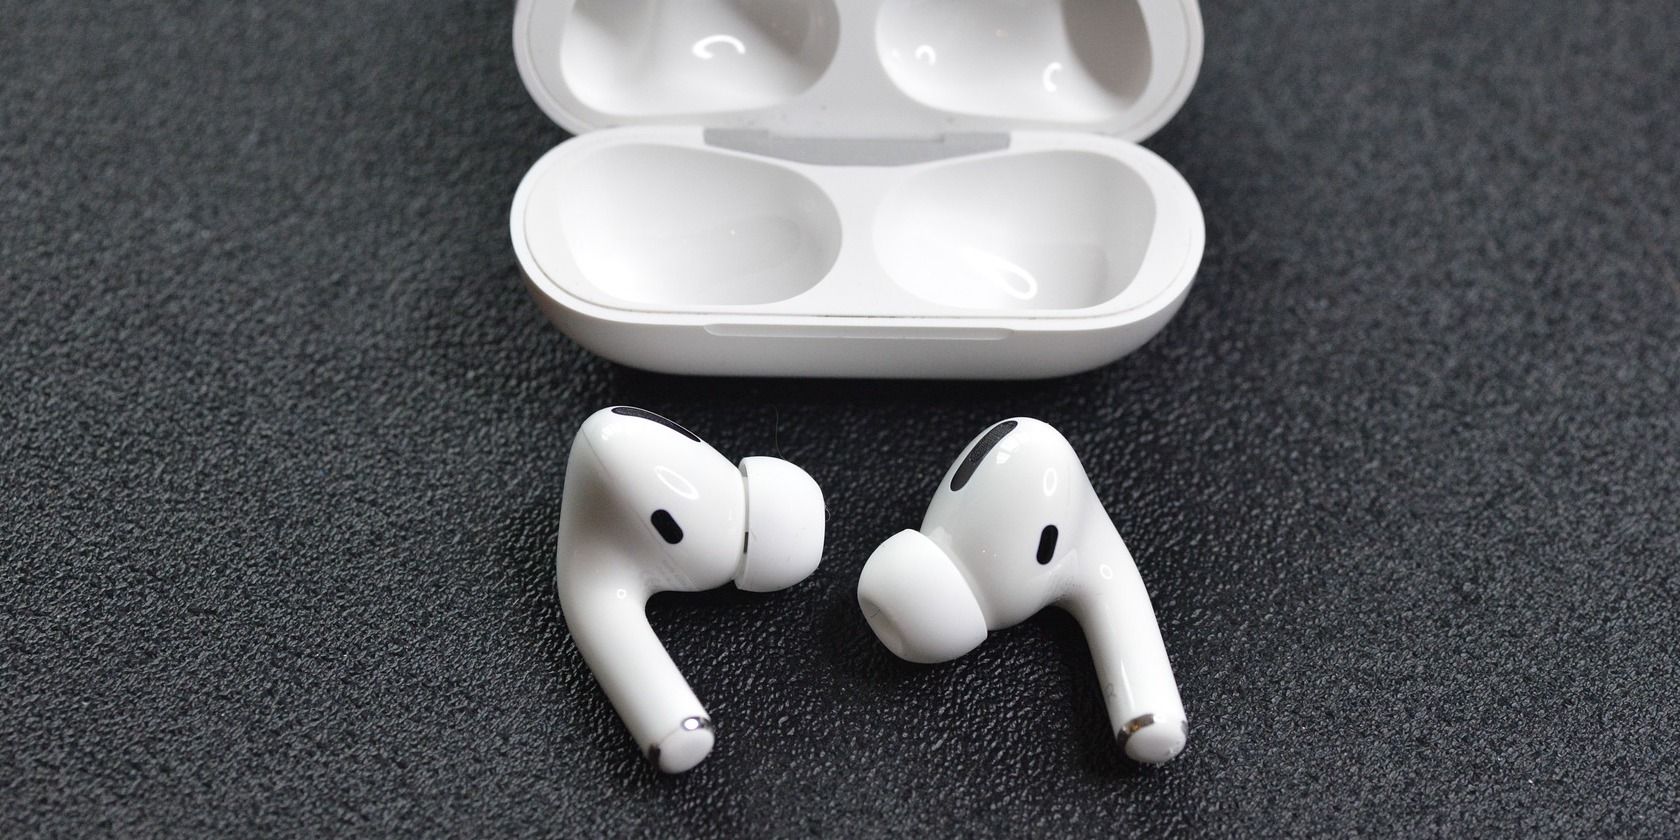 11 Solutions for When Your AirPods Do Not Appear in the Find My App